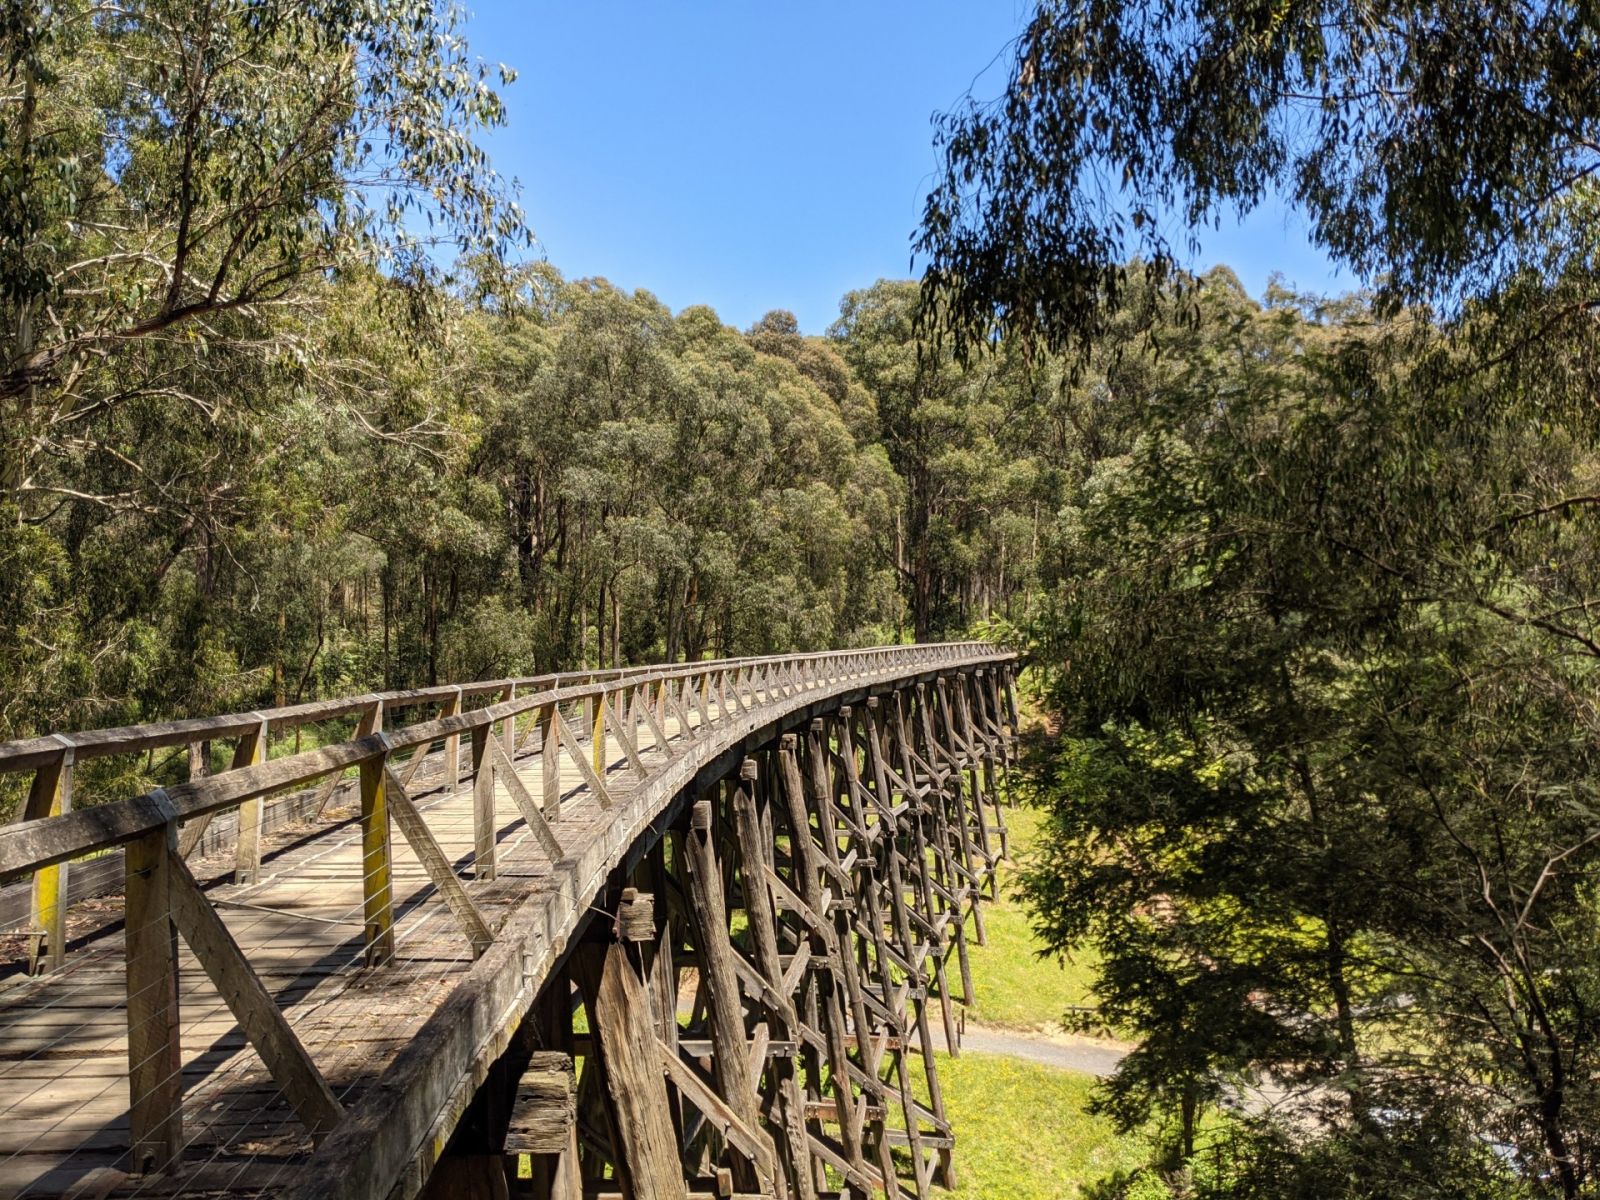 A tall and long timber trestle bridge stretches through the forest